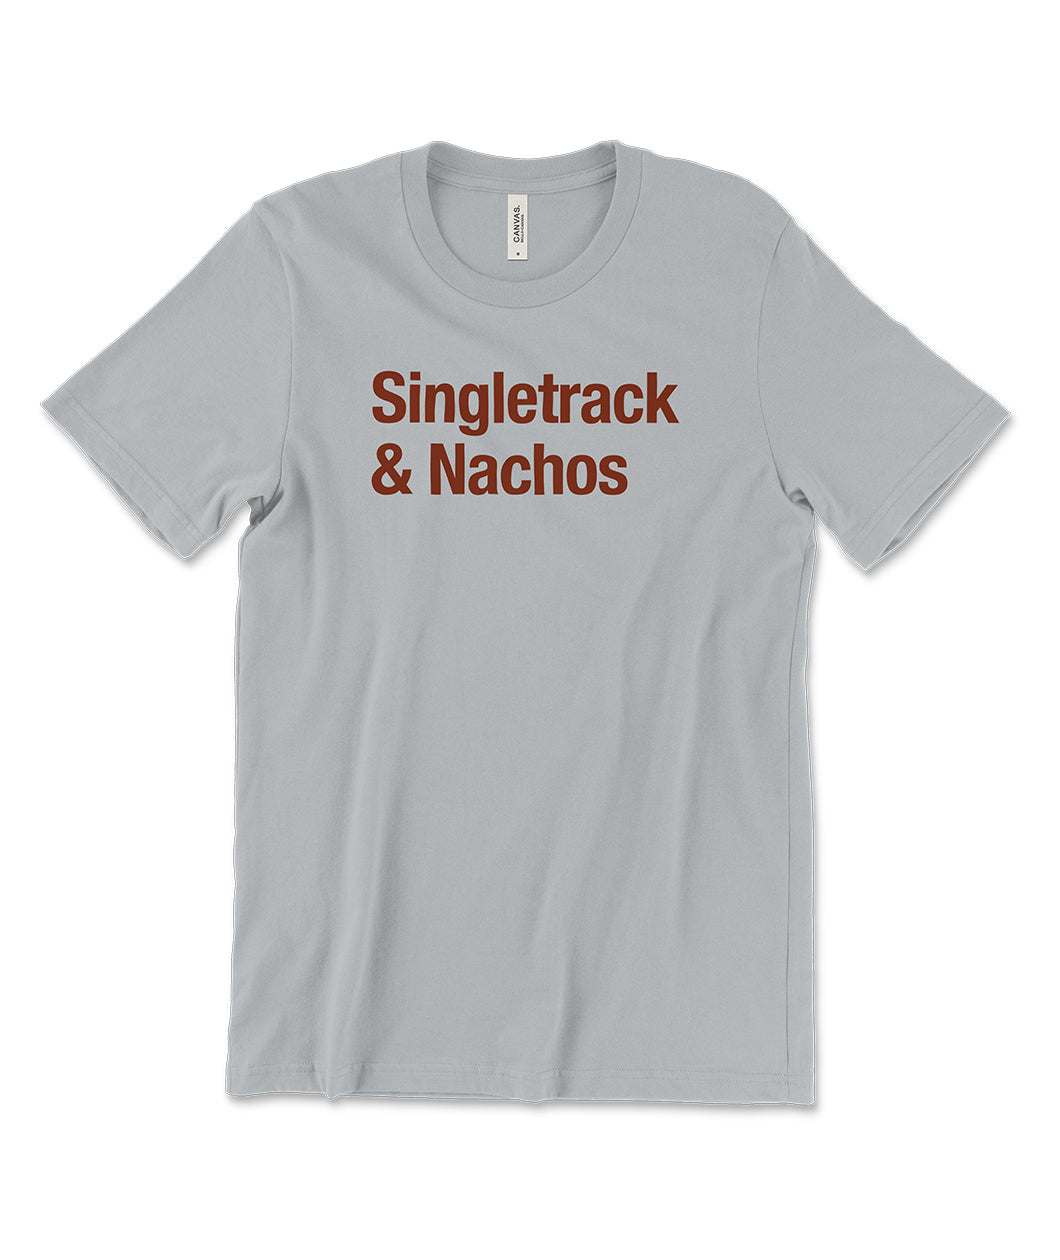 A silver/gray t-shirt with maroon lettering across the front that reads 